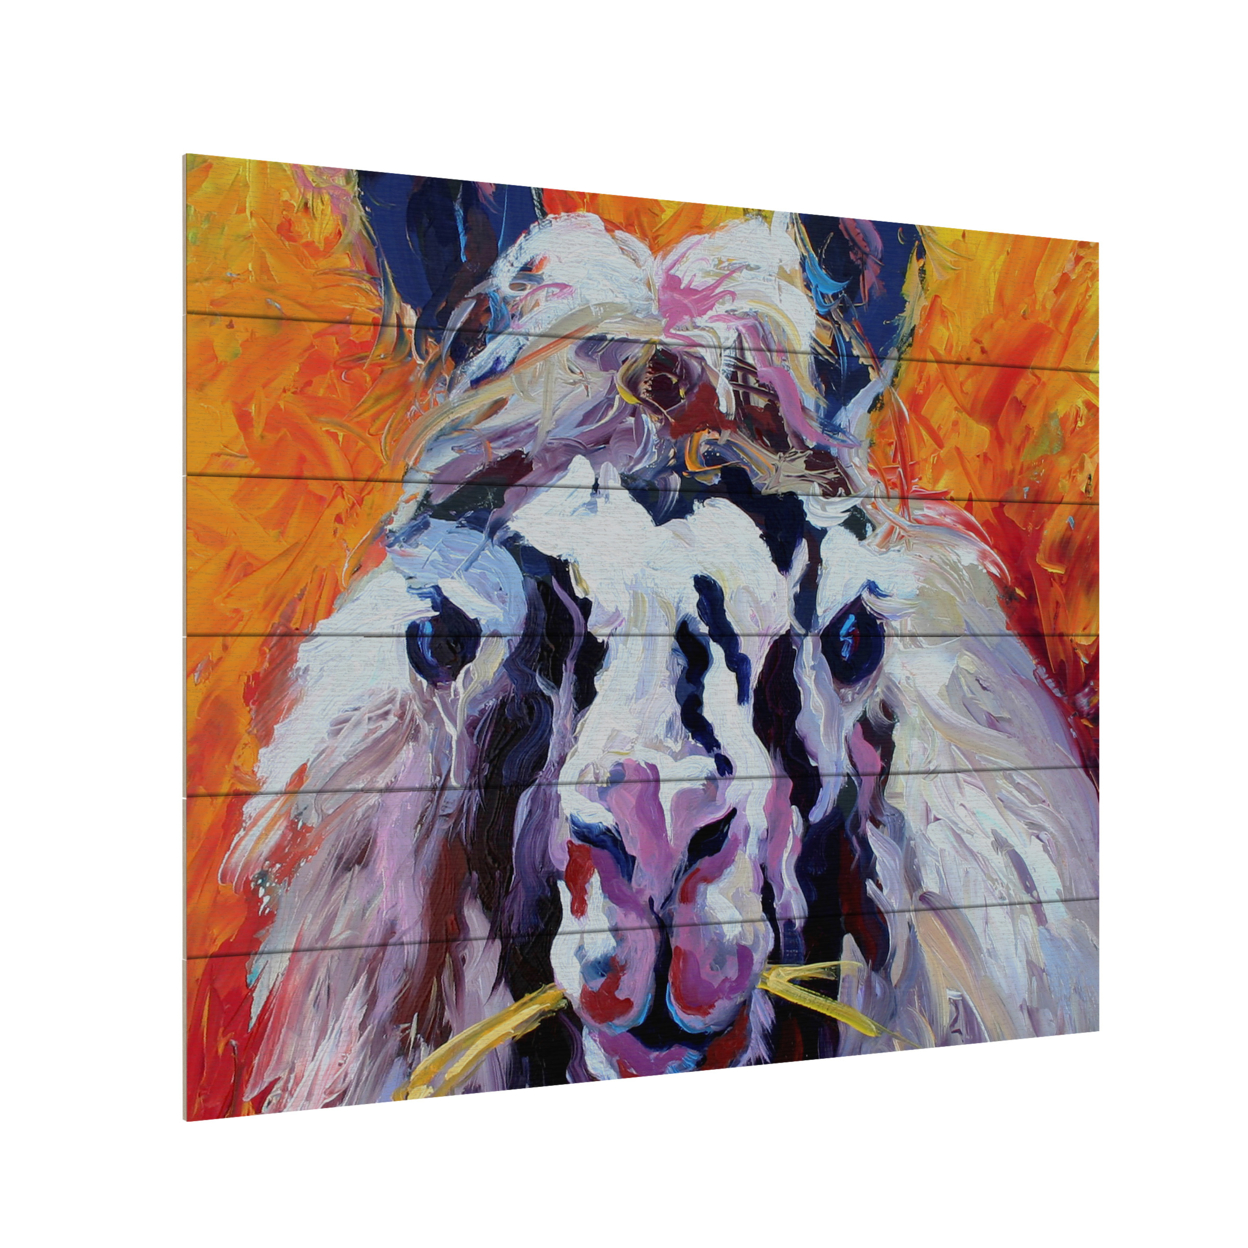 Wooden Slat Art 18 X 22 Inches Titled Llama III Ready To Hang Home Decor Picture